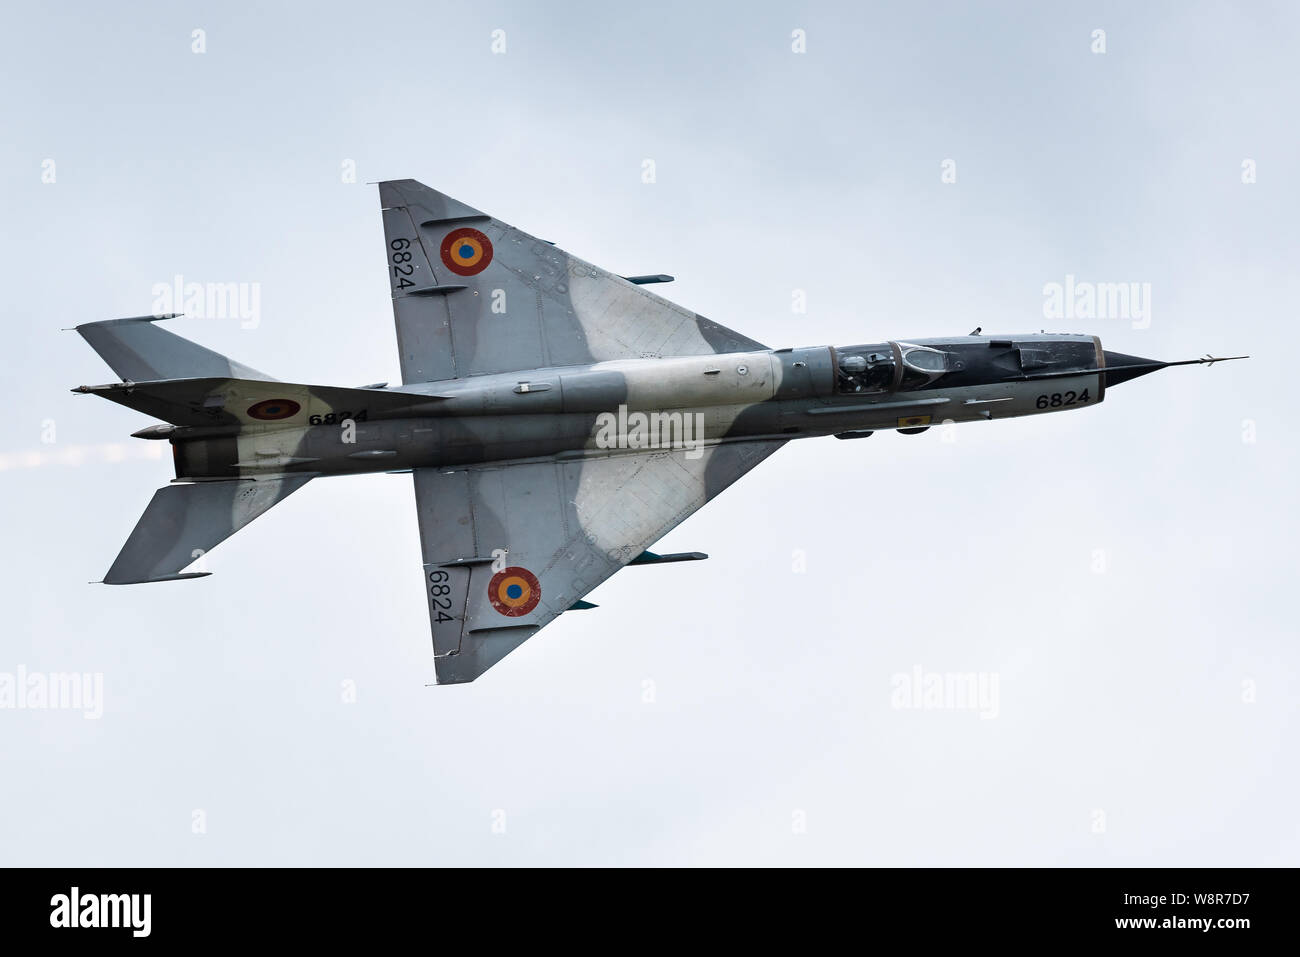 A Mikoyan-Gurevich MiG-21 supersonic fighter jet of the Romanian Air Force. Stock Photo